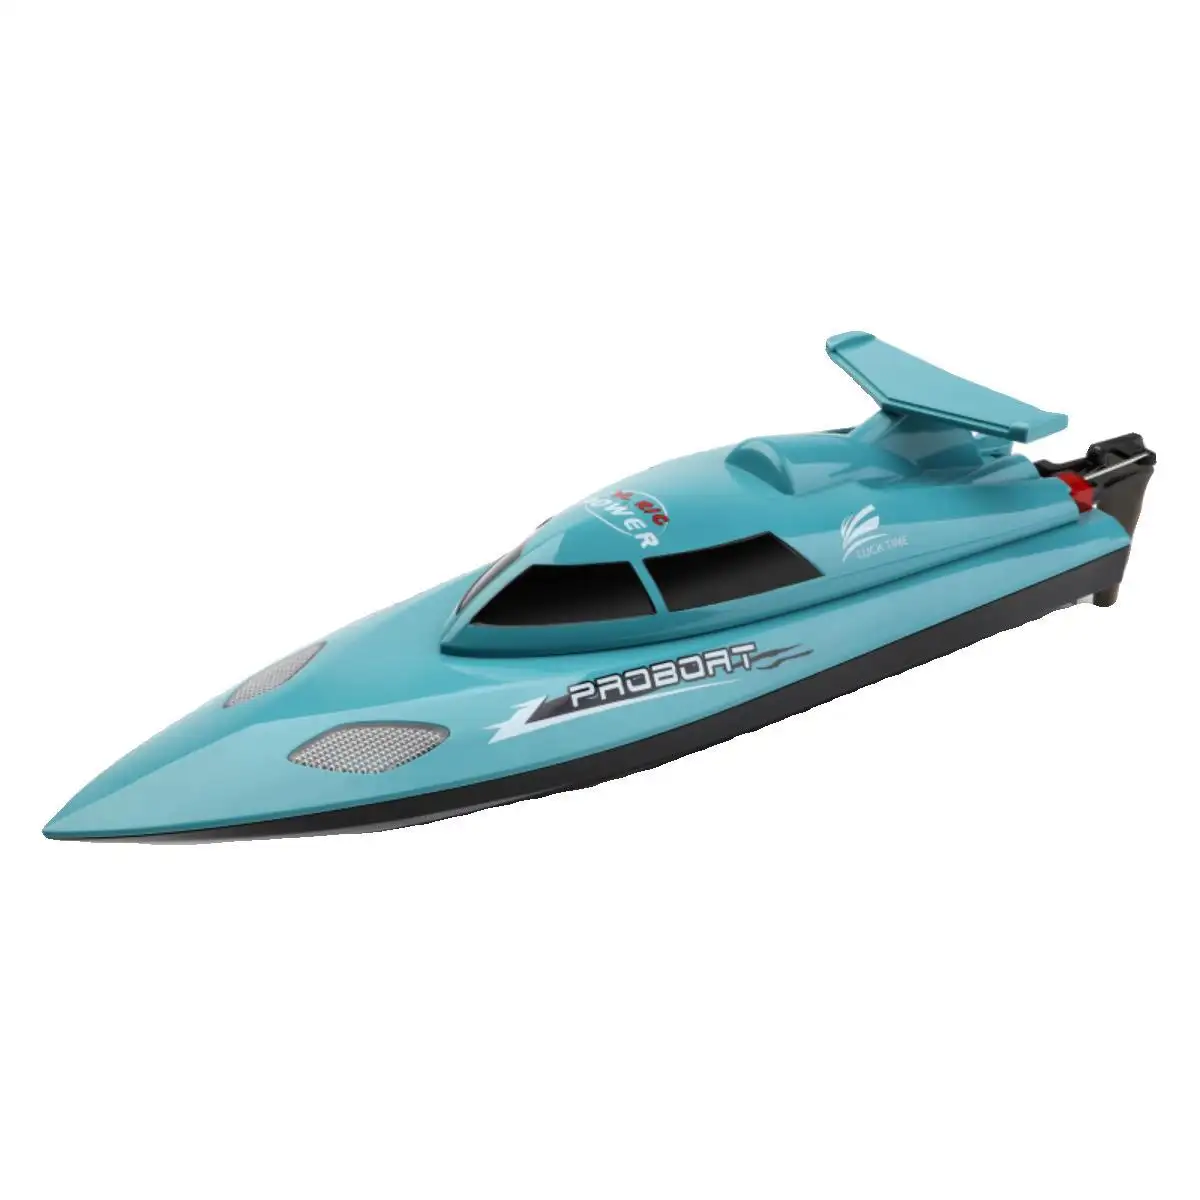 Newset HOSHI WLTOYS WL911-A RC Boat Ship 2.4G RC Racing Boat Waterproof Model Electric Radio Remote Control RC Speedboat